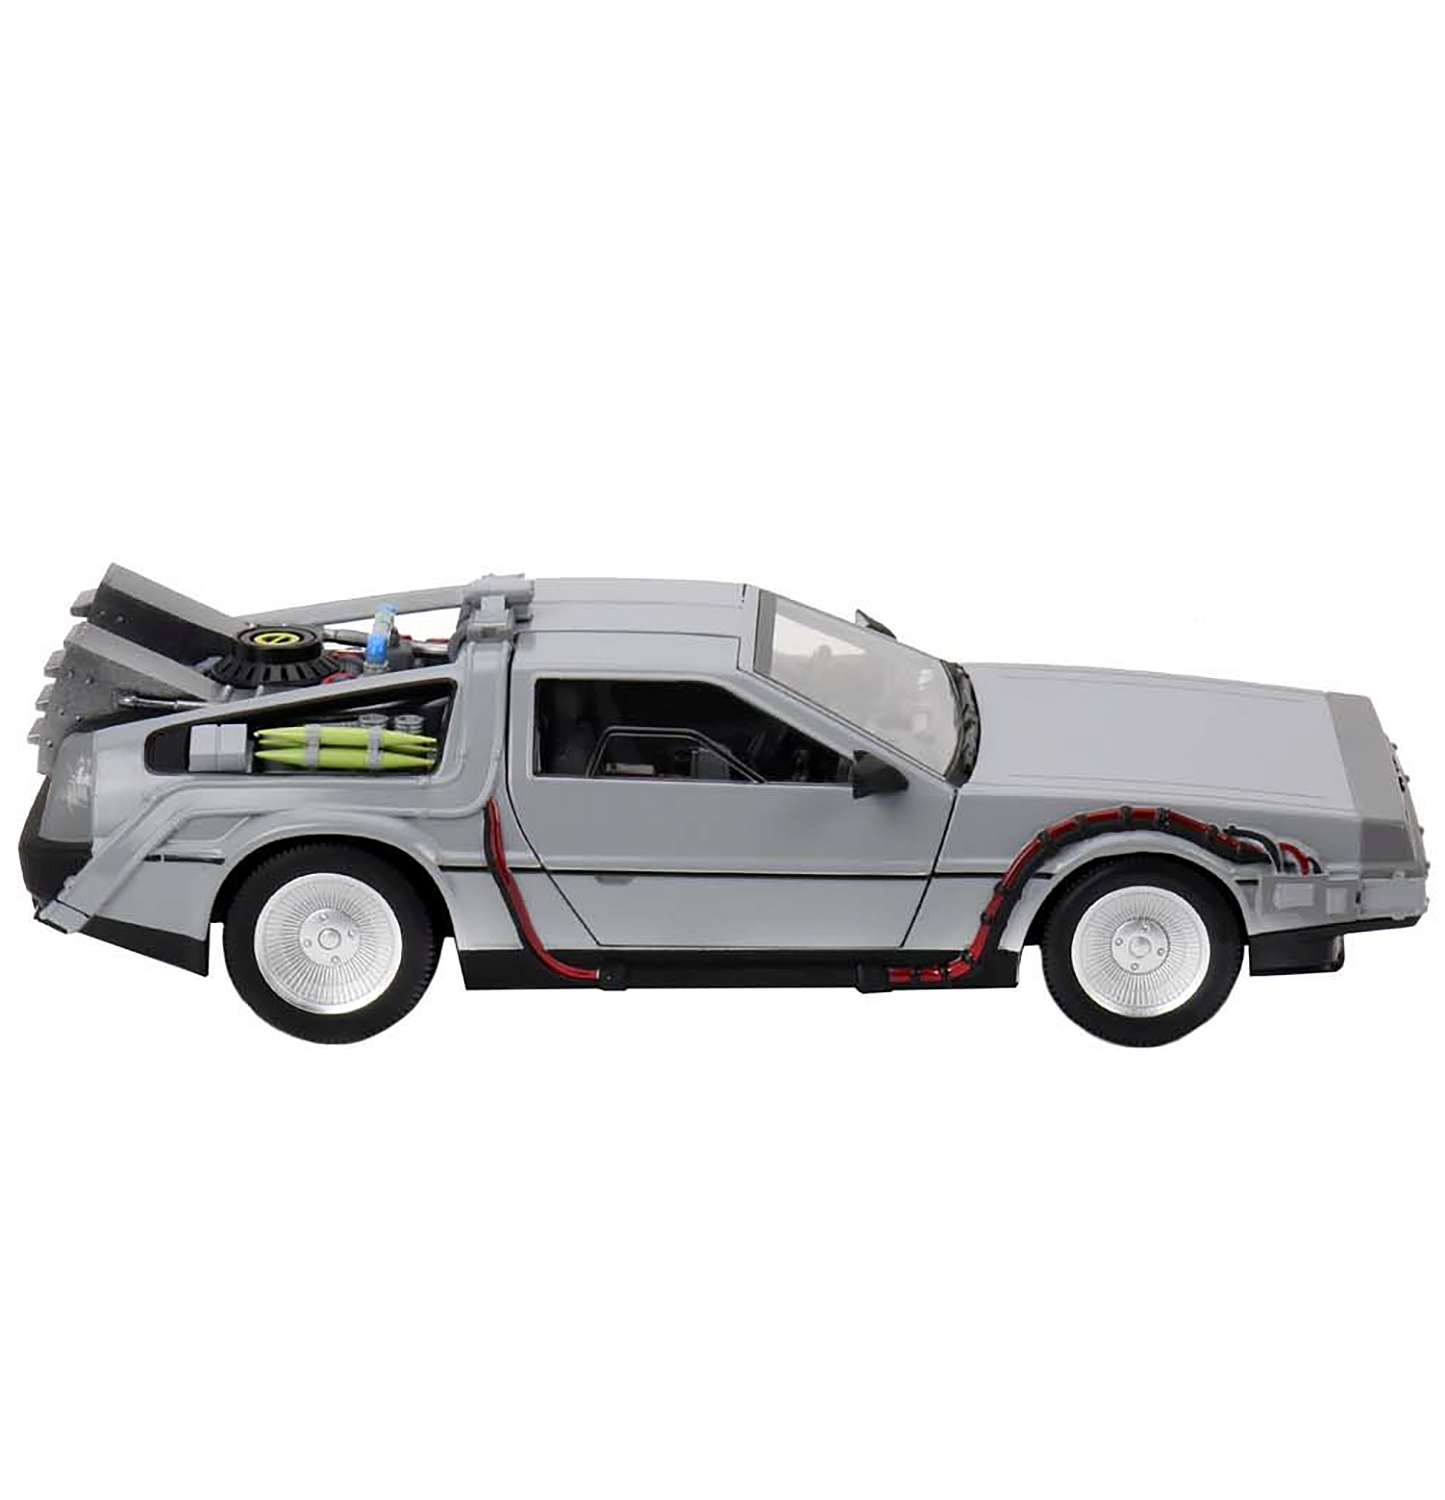 Back to the future DeLorean Diecast Vehicle Time Machine - Action 